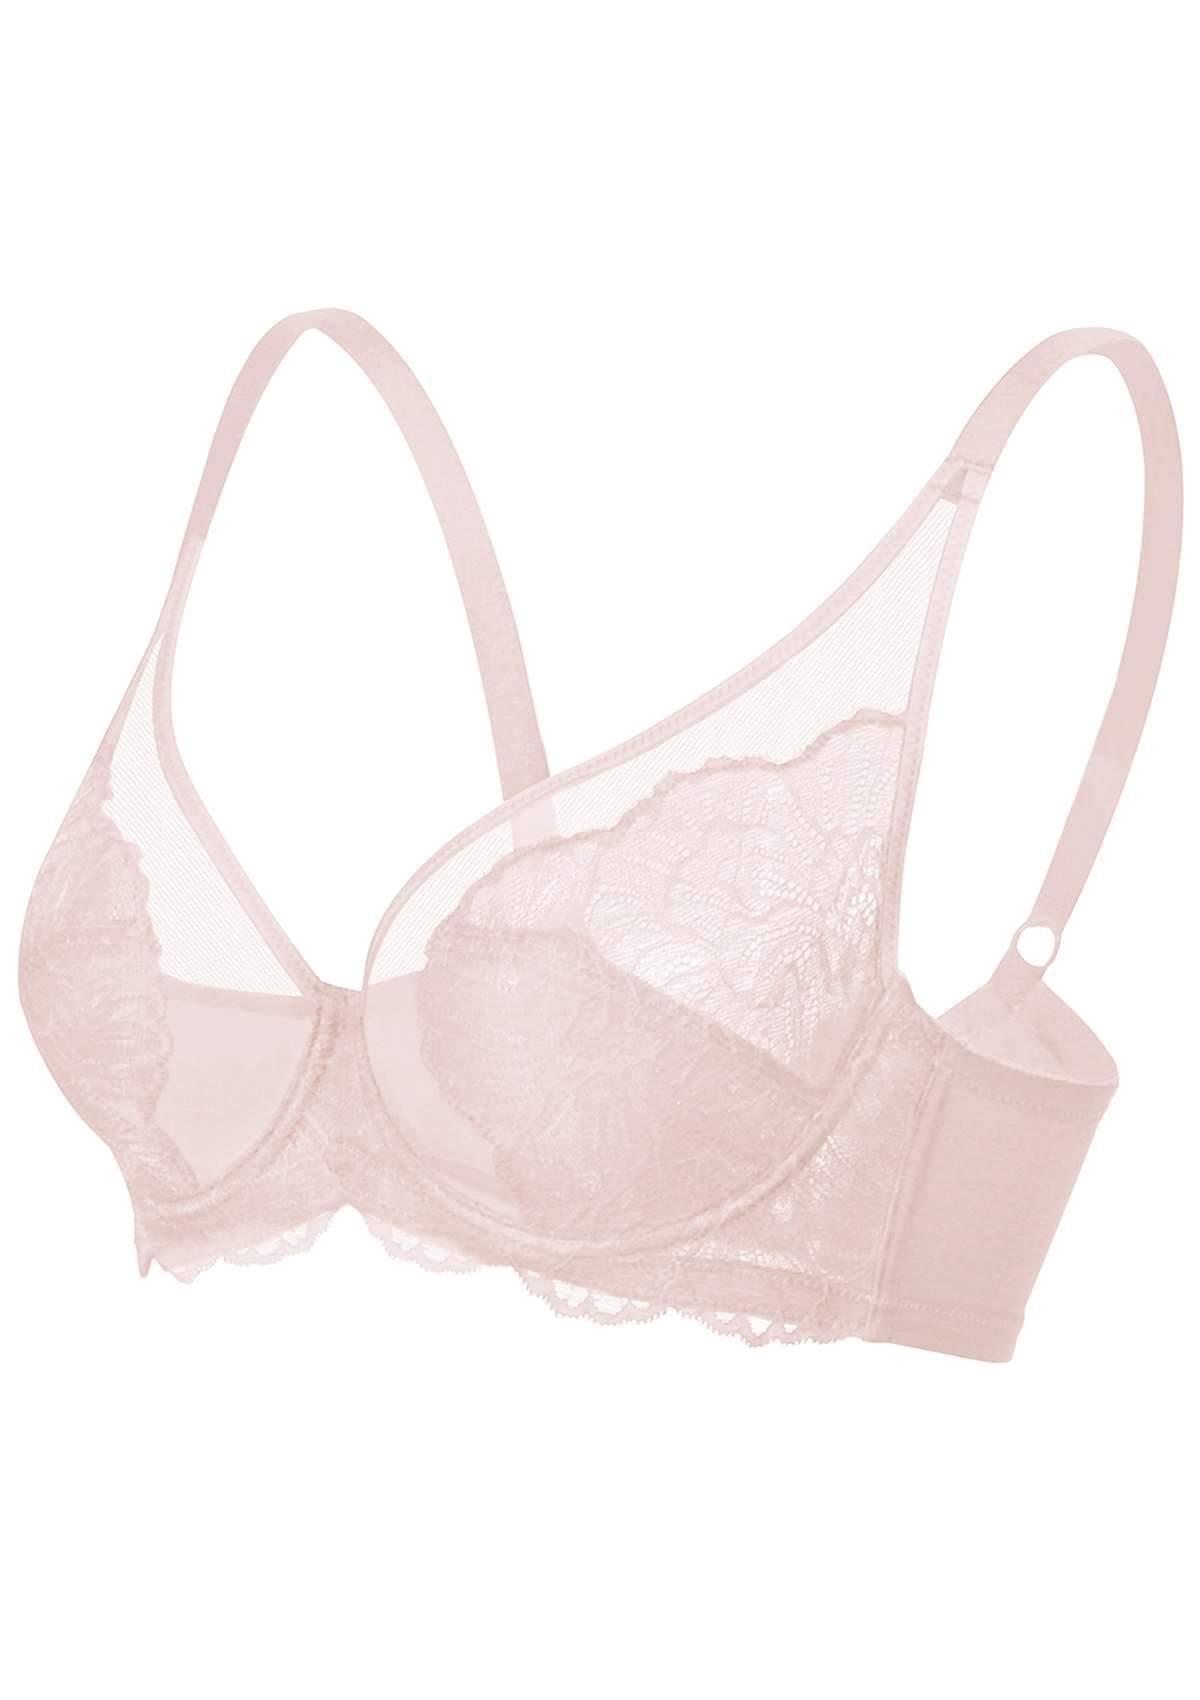 HSIA Blossom Lace Bra And Panties Set: Best Bra For Large Busts - Dark Pink / 44 / D